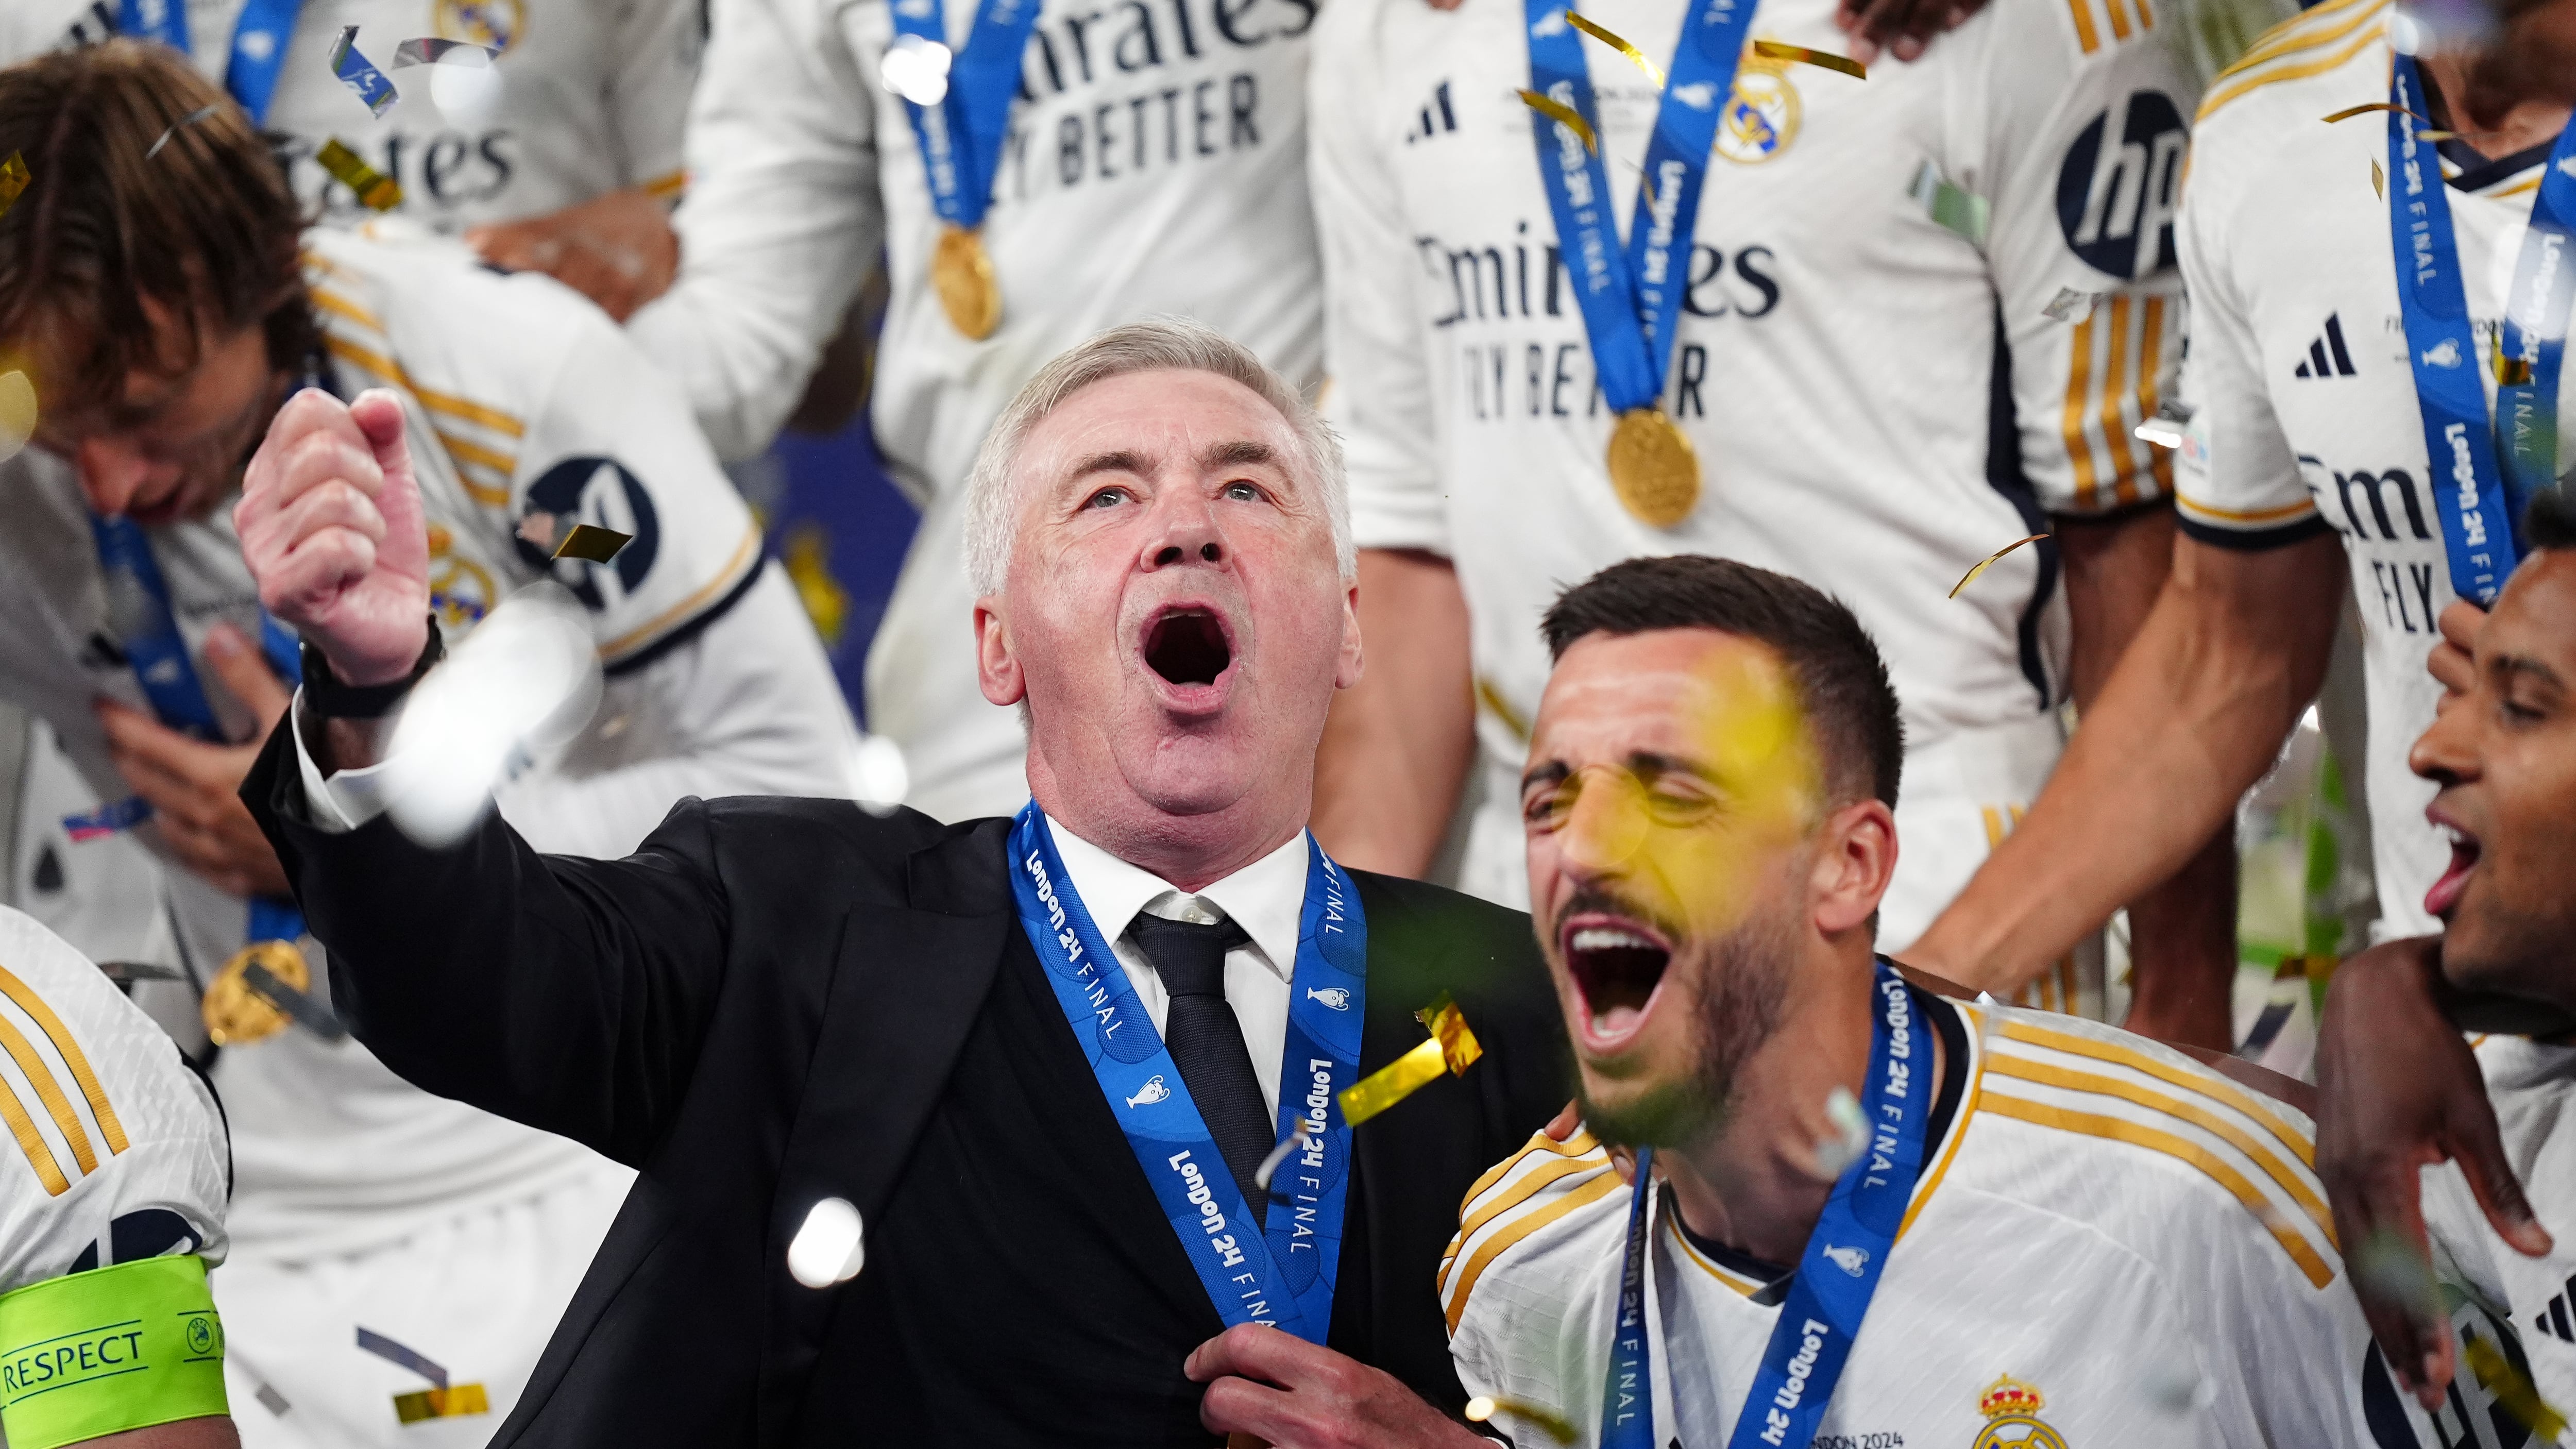 Carlo Ancelotti celebrates Real Madrid’s Champions League win with his players